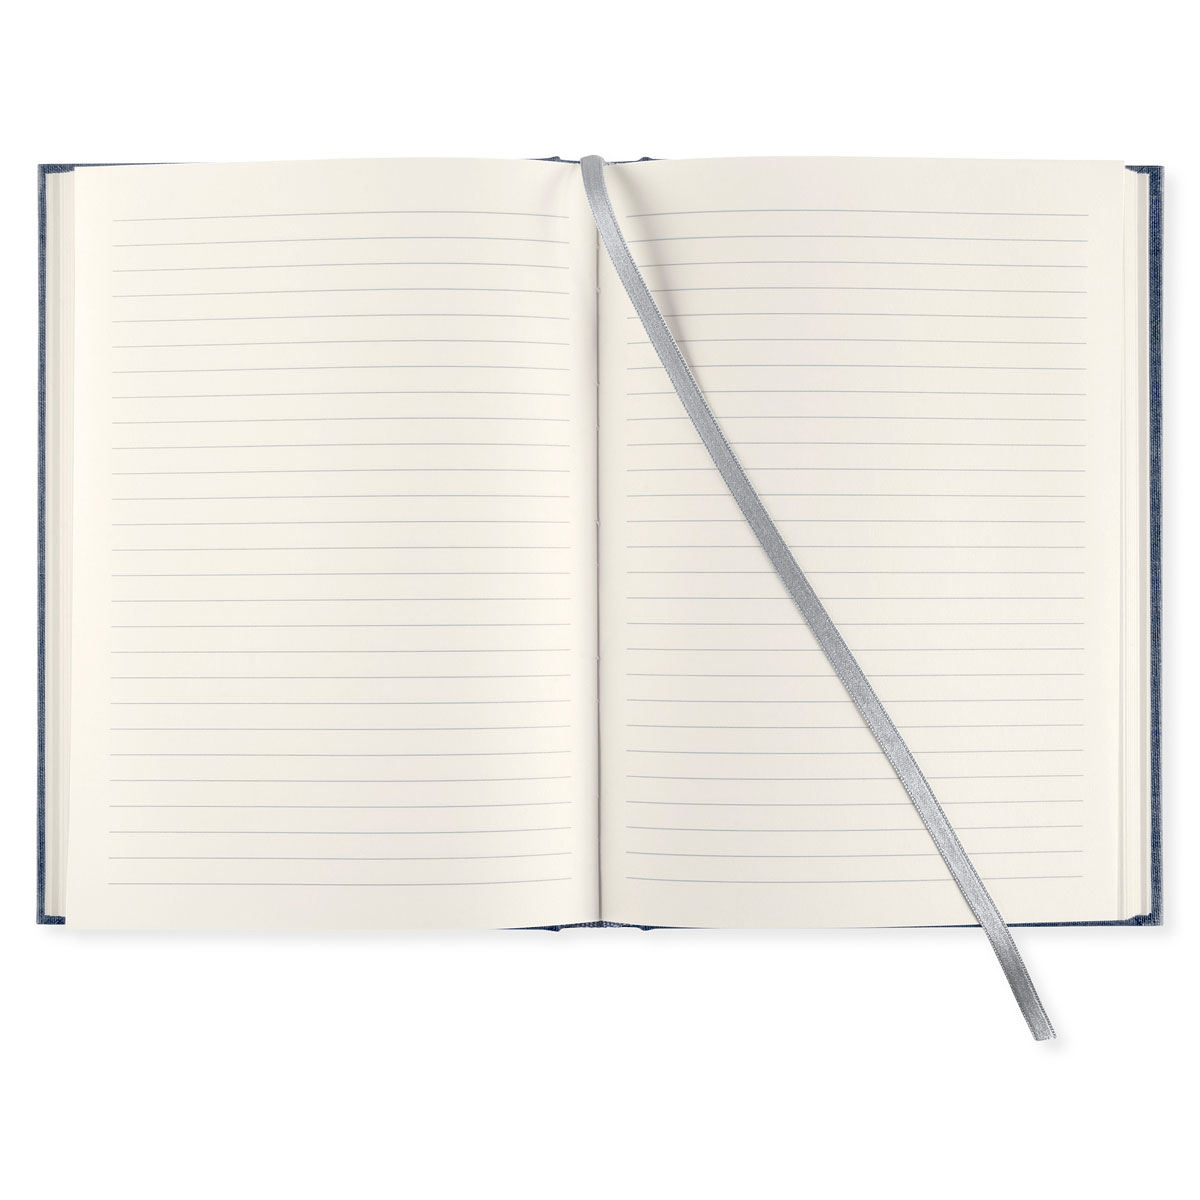 Notebook A5 Ruled Dark Denim in the group Paper & Pads / Note & Memo / Notebooks & Journals at Pen Store (128469)